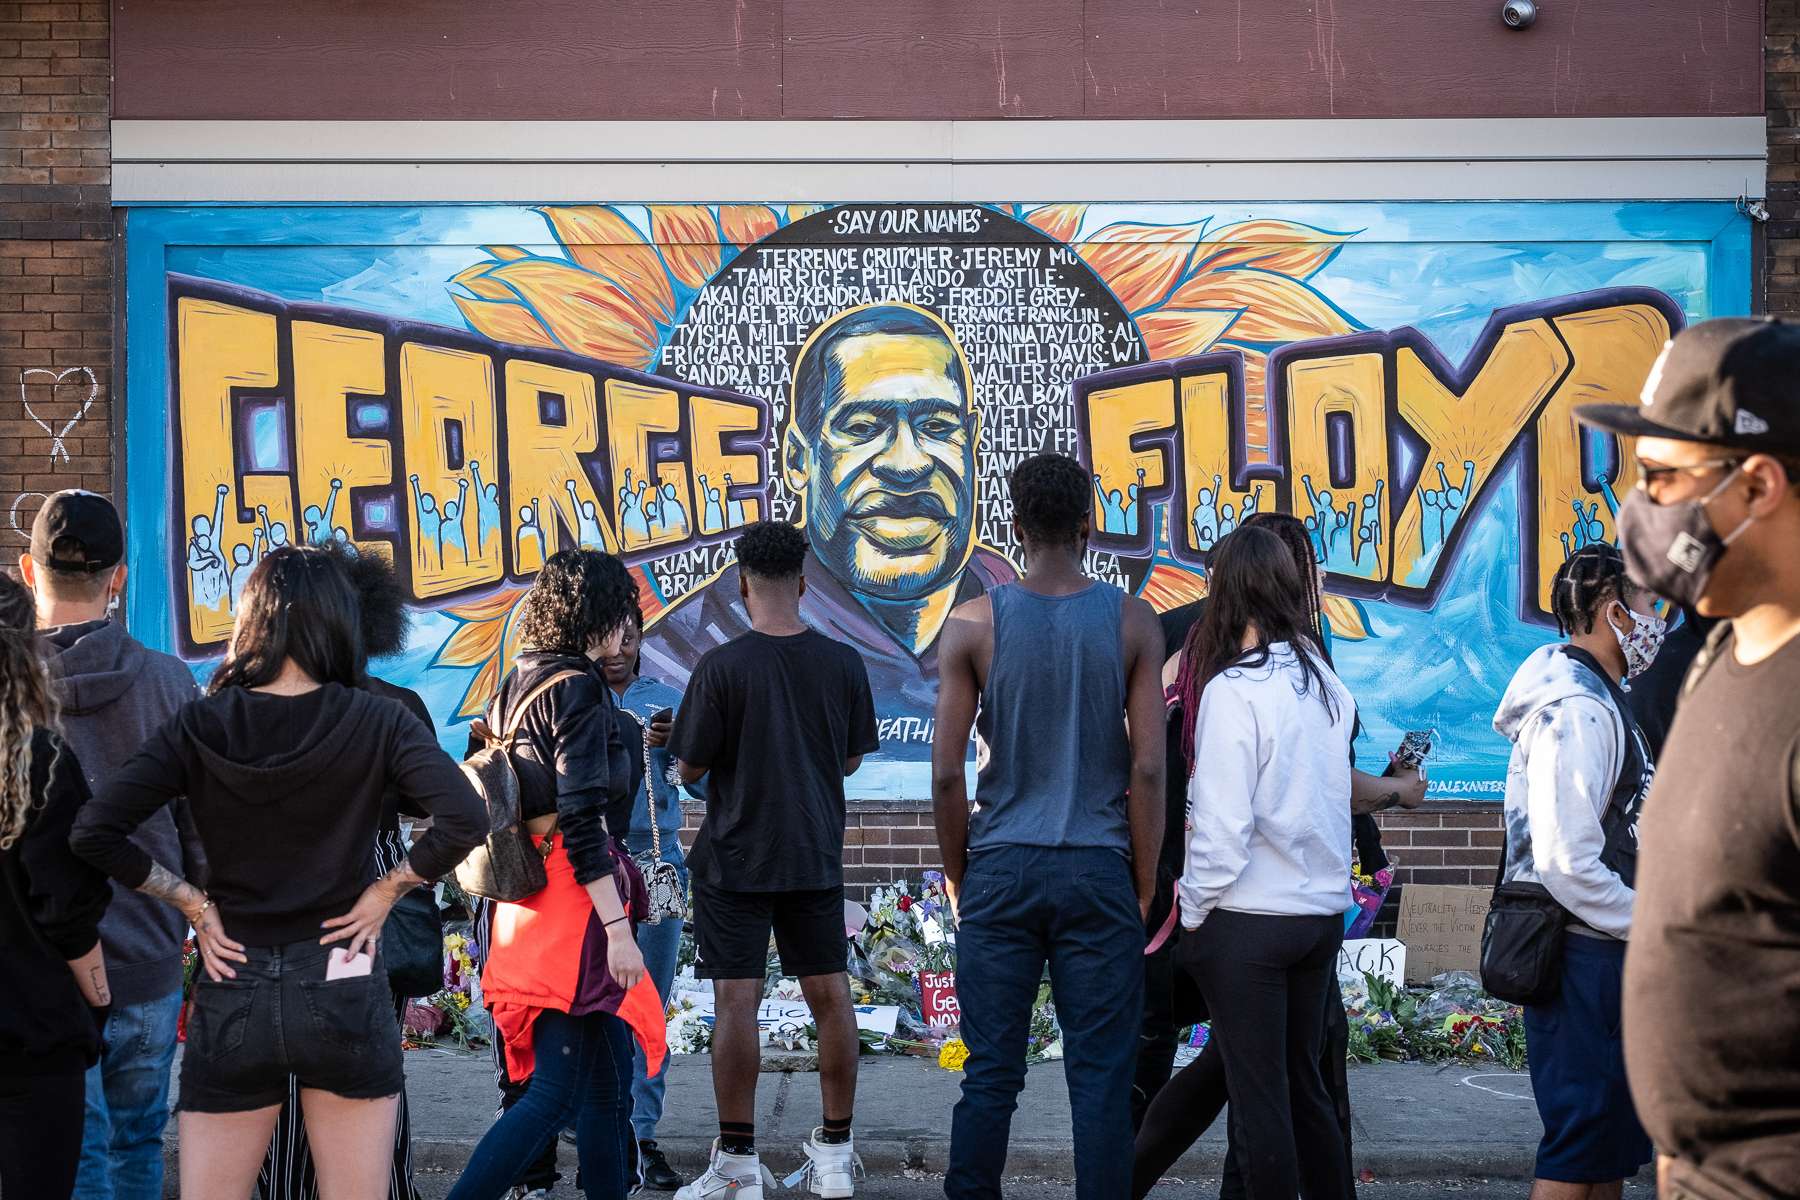 Community members gather at a mural done in tribute to George Floyd at East 38th Street and Chicago Avenue, the site where George Floyd was killed by police on Friday, May 29, 2020 in Minneapolis, MN.